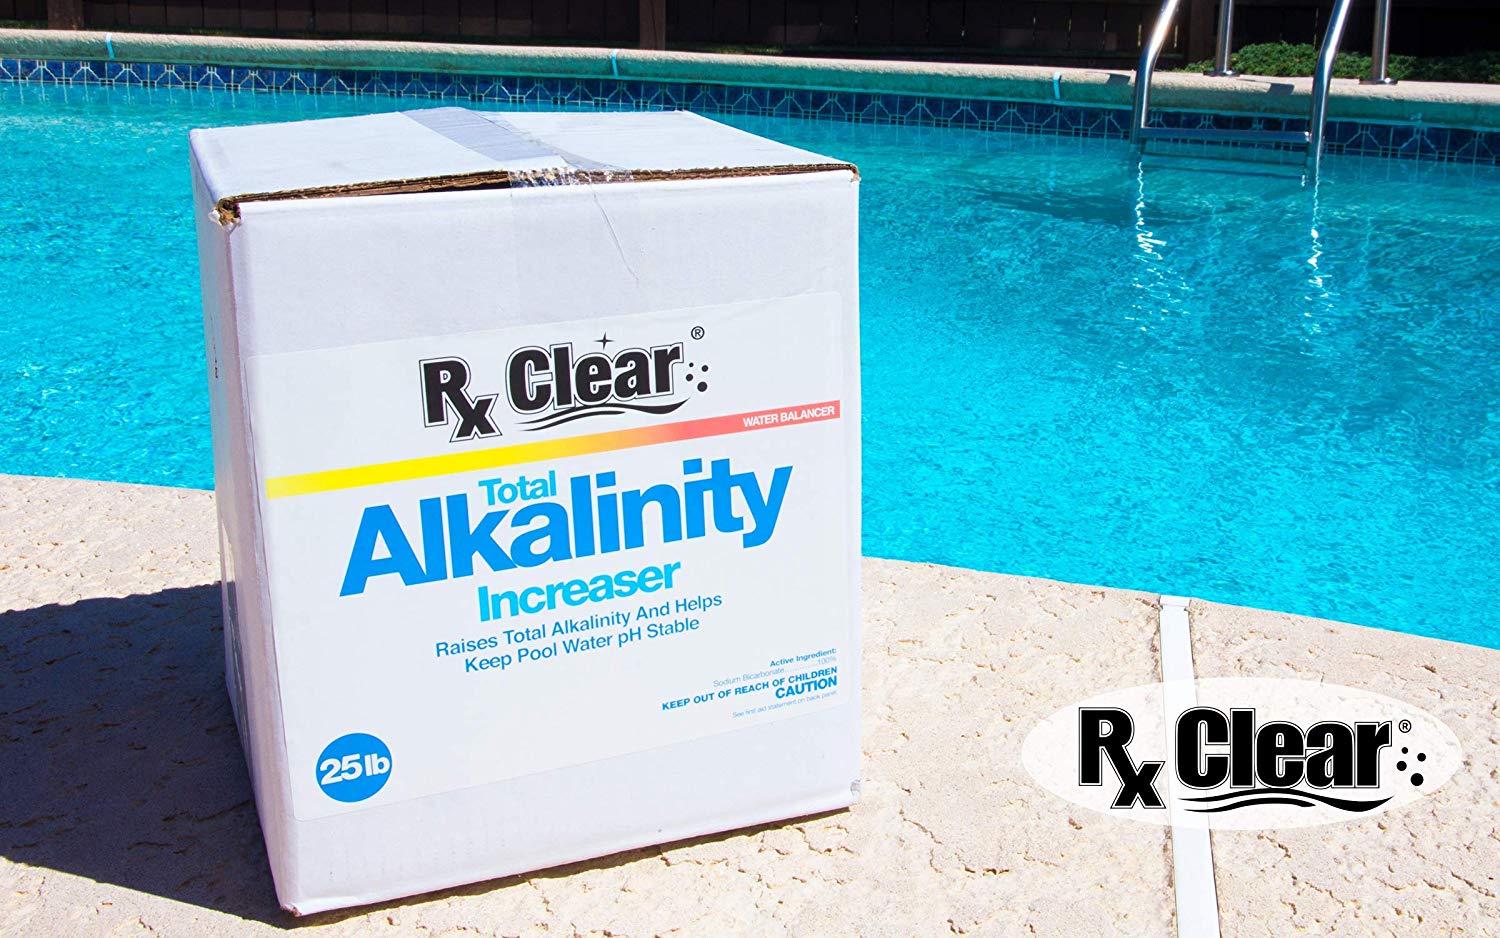 Rx Clear Total Alkalinity Increaser for Swimming Pools, Sodium Bicarbonate, 25 lbs - image 7 of 7